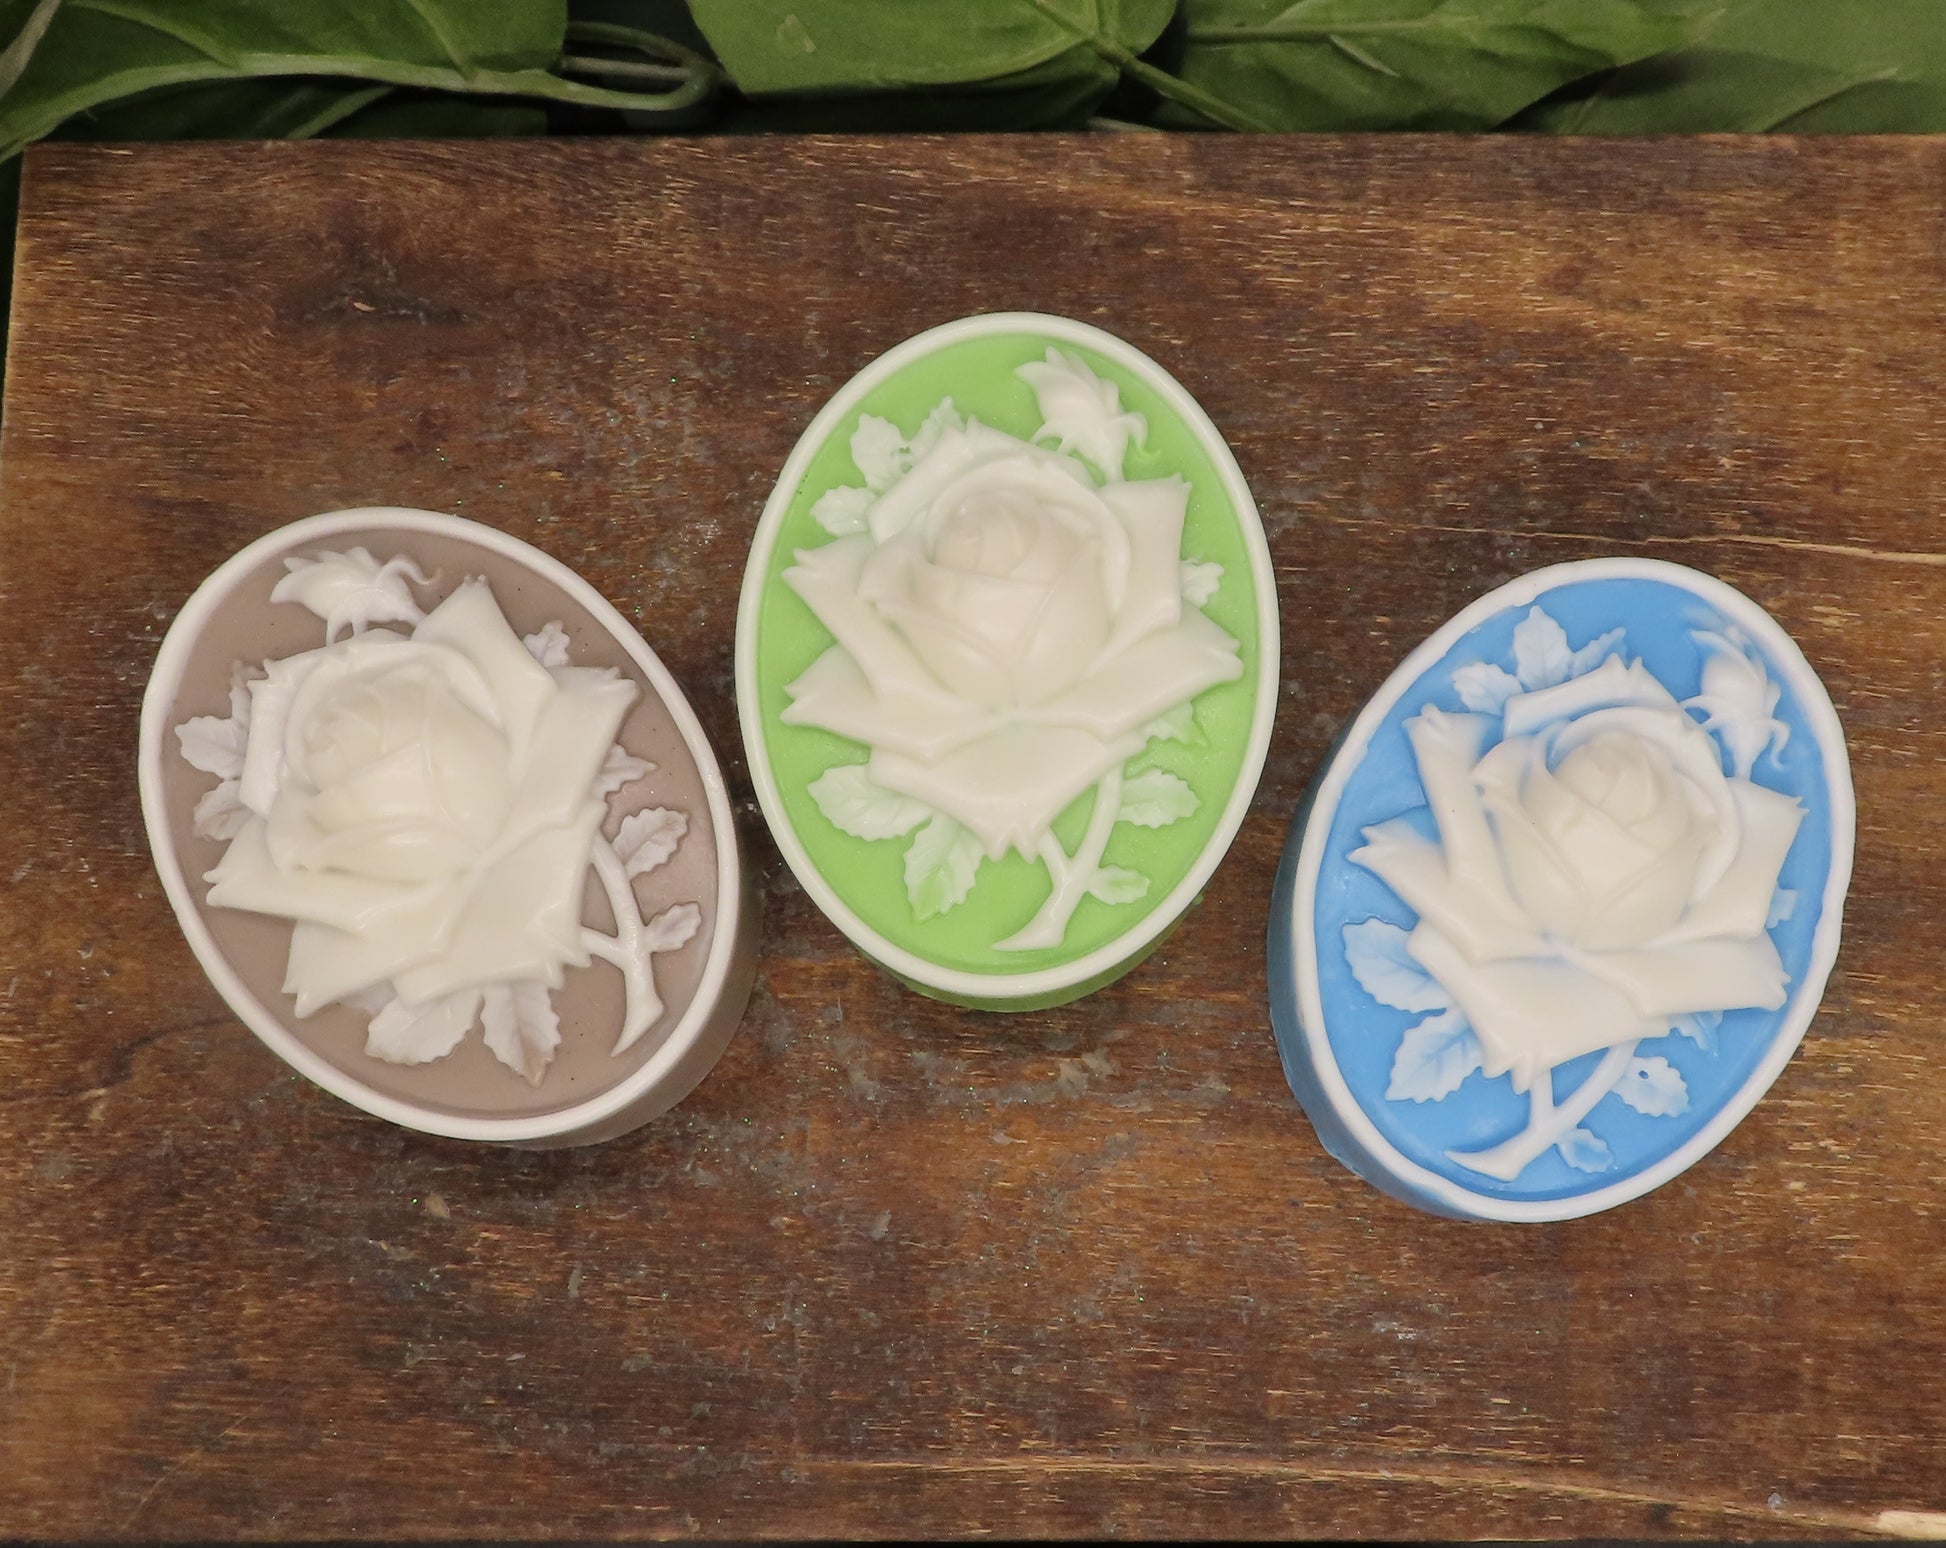 Brown, green and blue rose cameo goat milk soaps